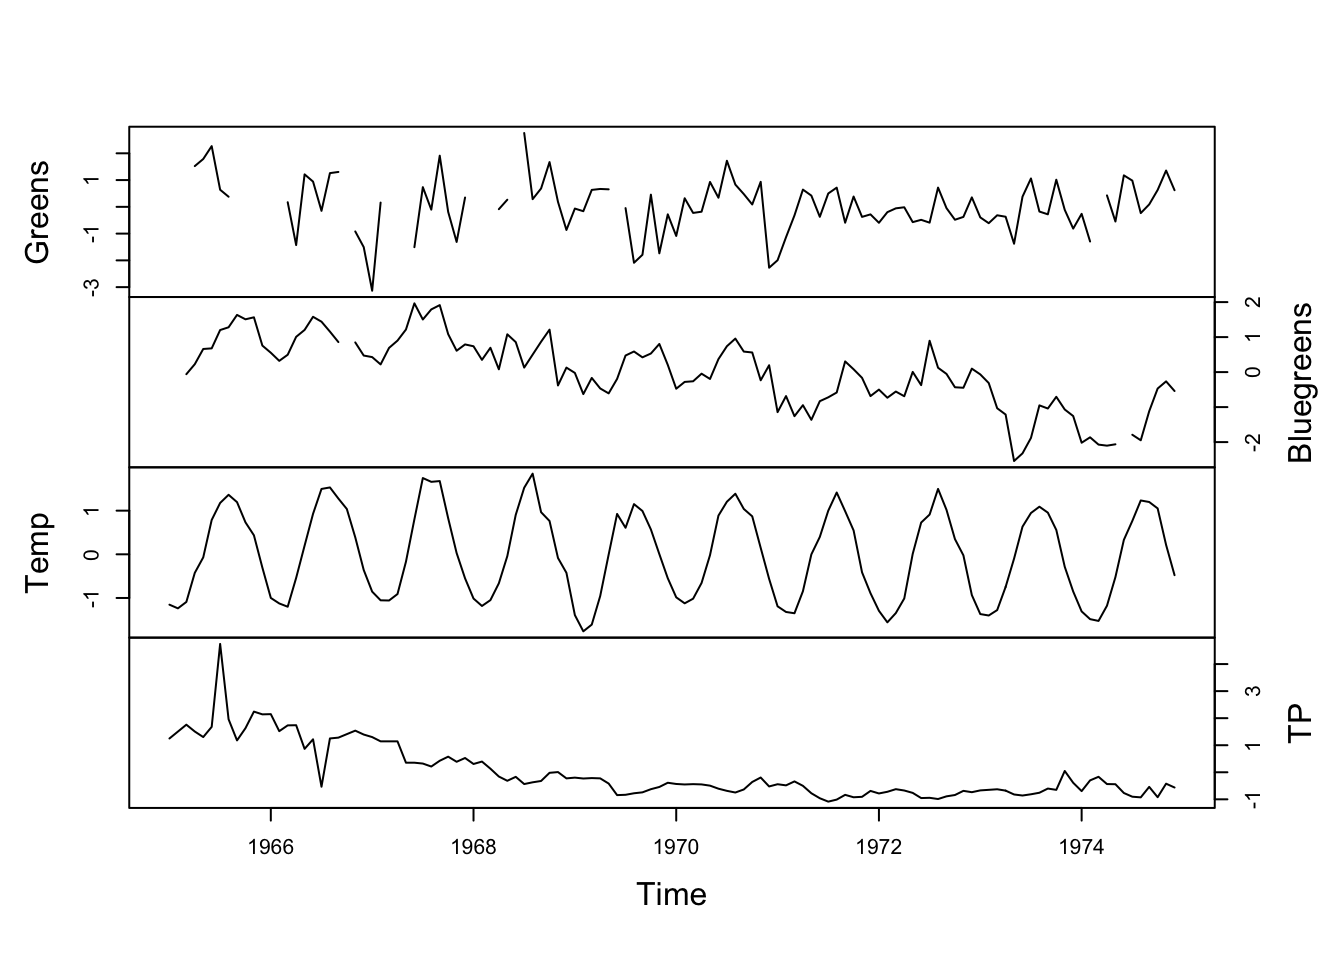 Time series of Green and Bluegreen algae abundances in Lake Washington along with the temperature and total phosporous covariates.